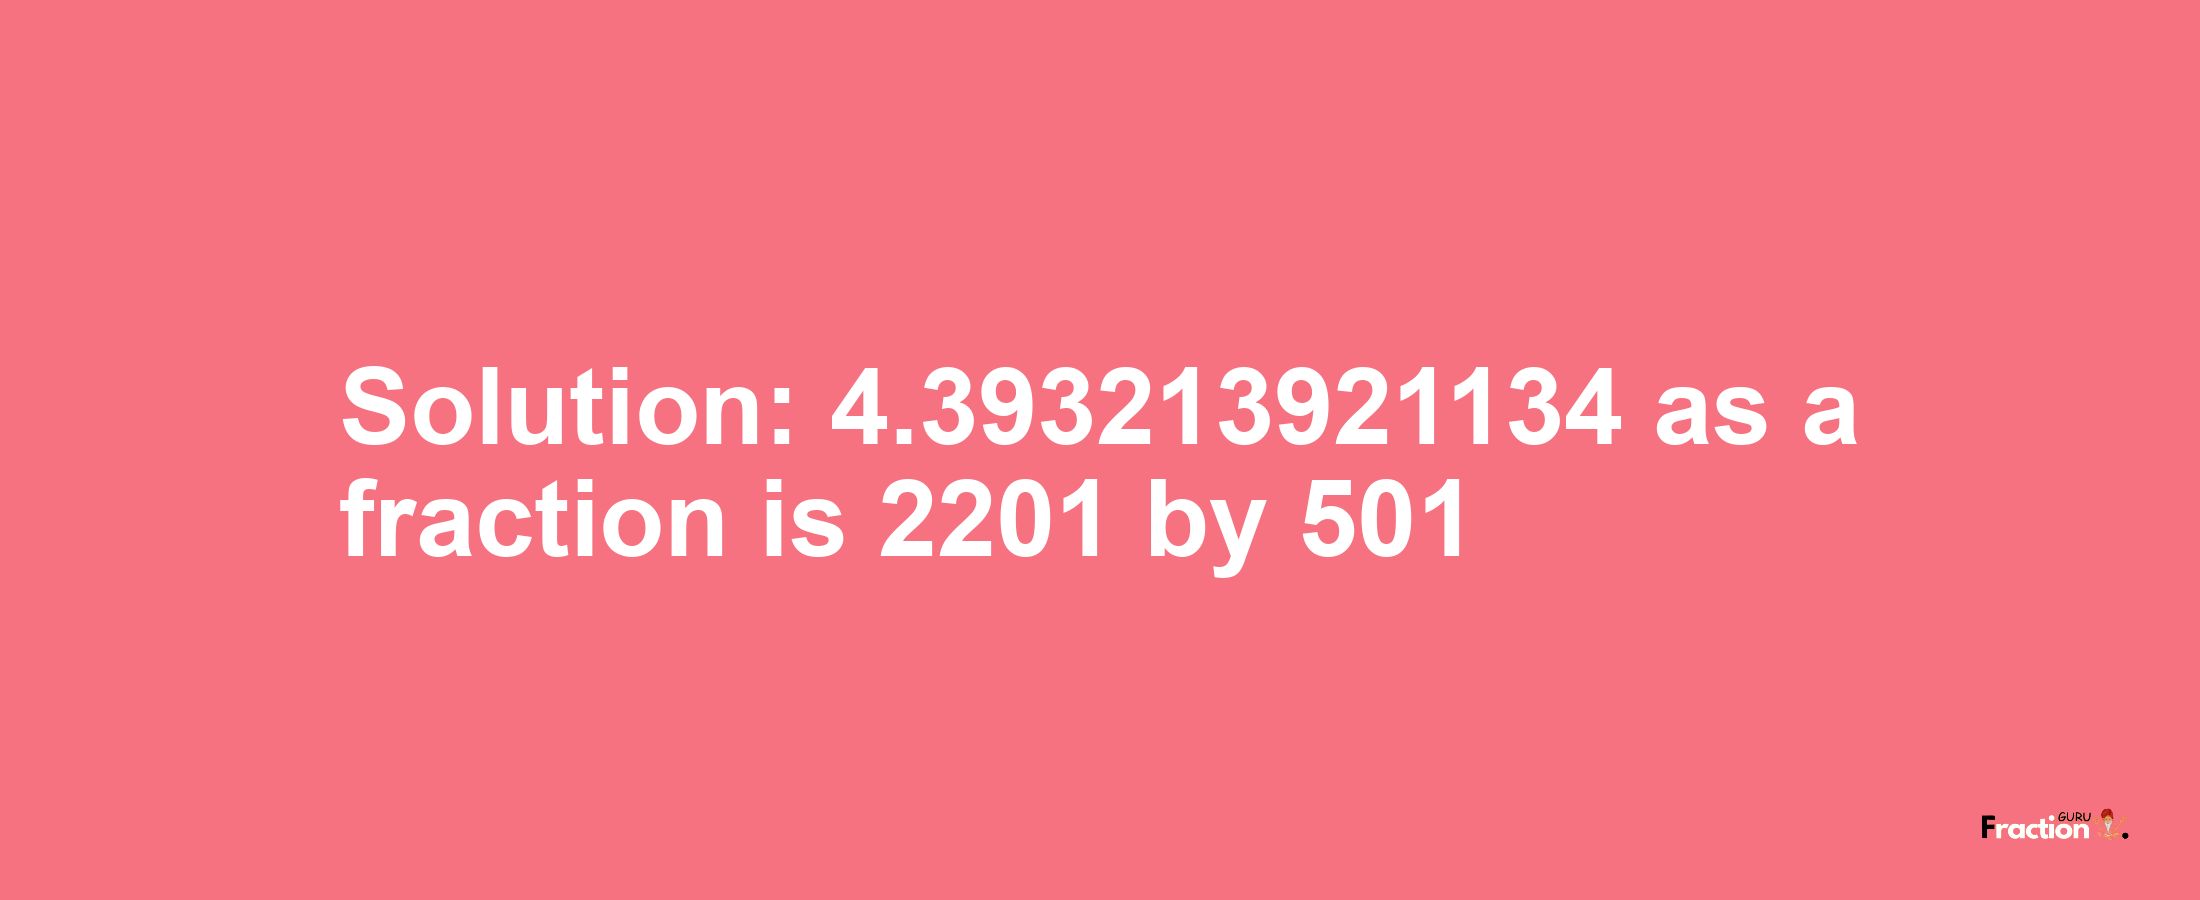 Solution:4.393213921134 as a fraction is 2201/501